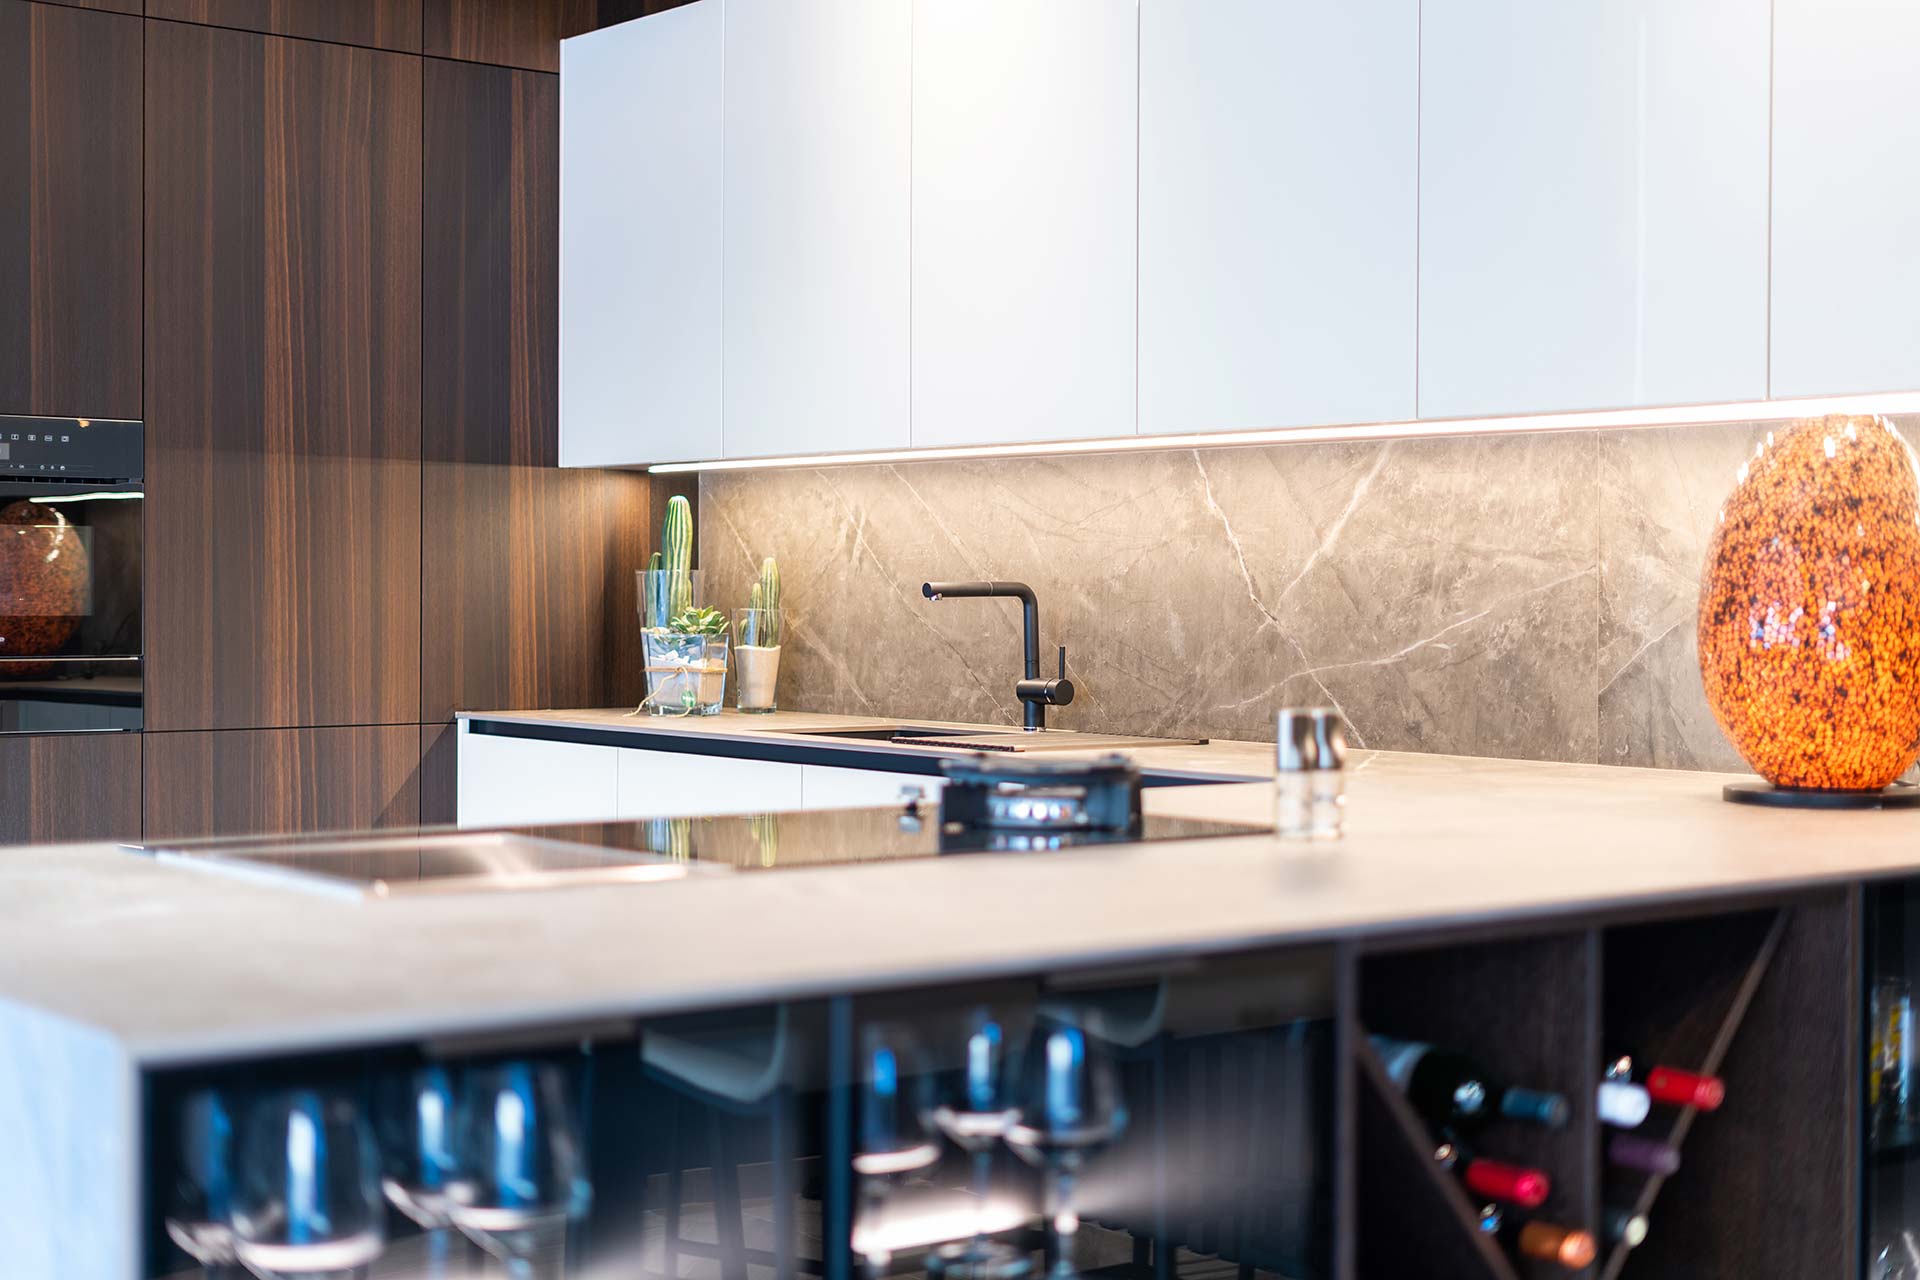 Cuines Fernández, a new and exclusive Santos kitchen showroom